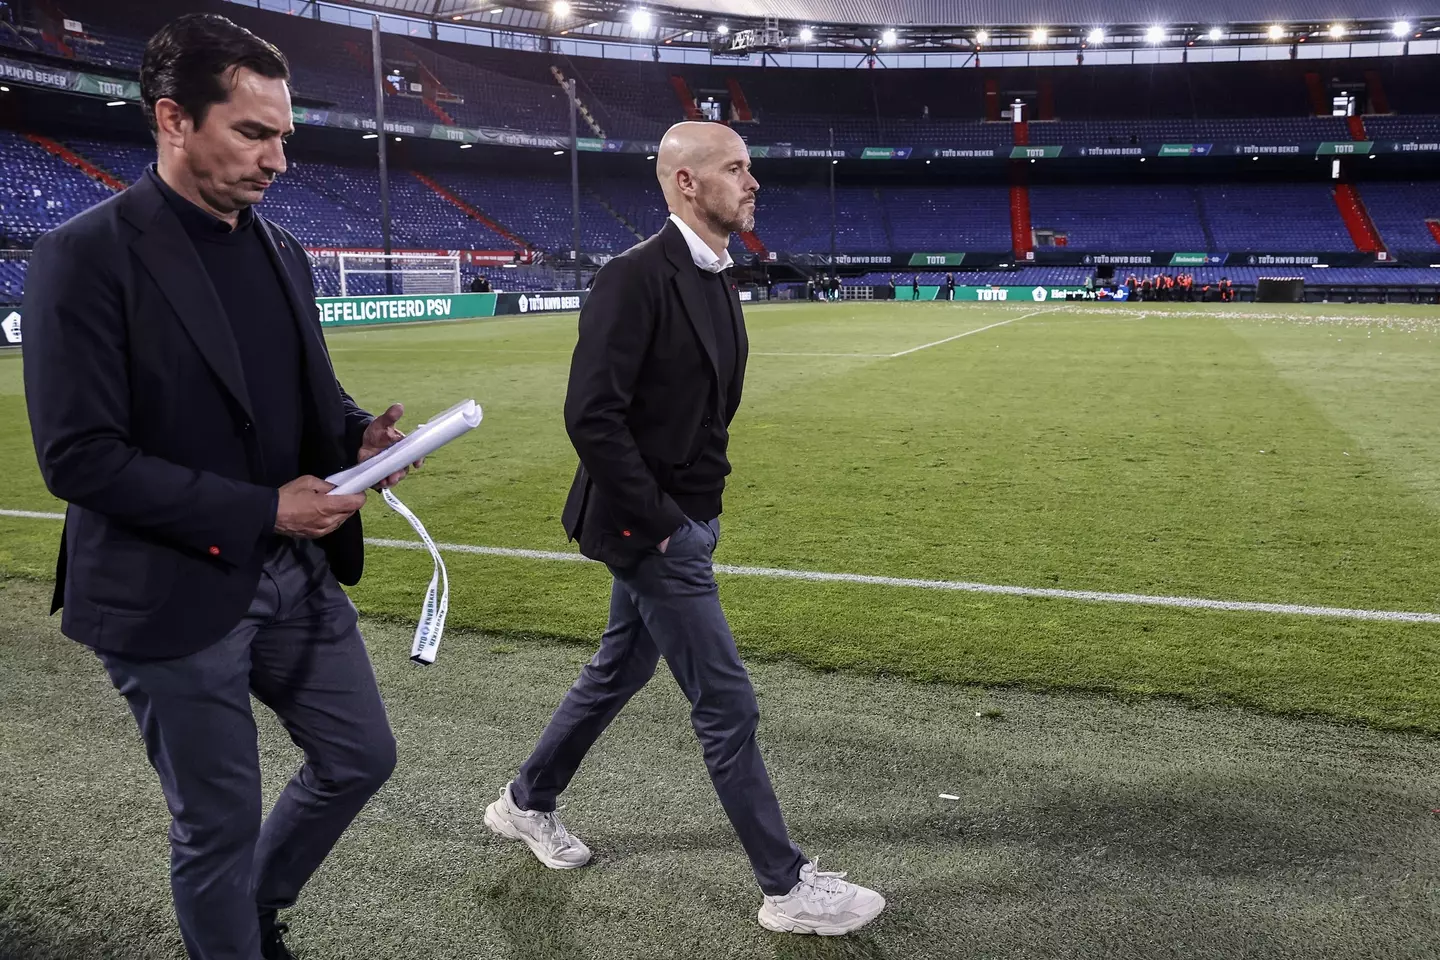 Ten Hag's arrival couldn't come soon enough. Image: PA Images